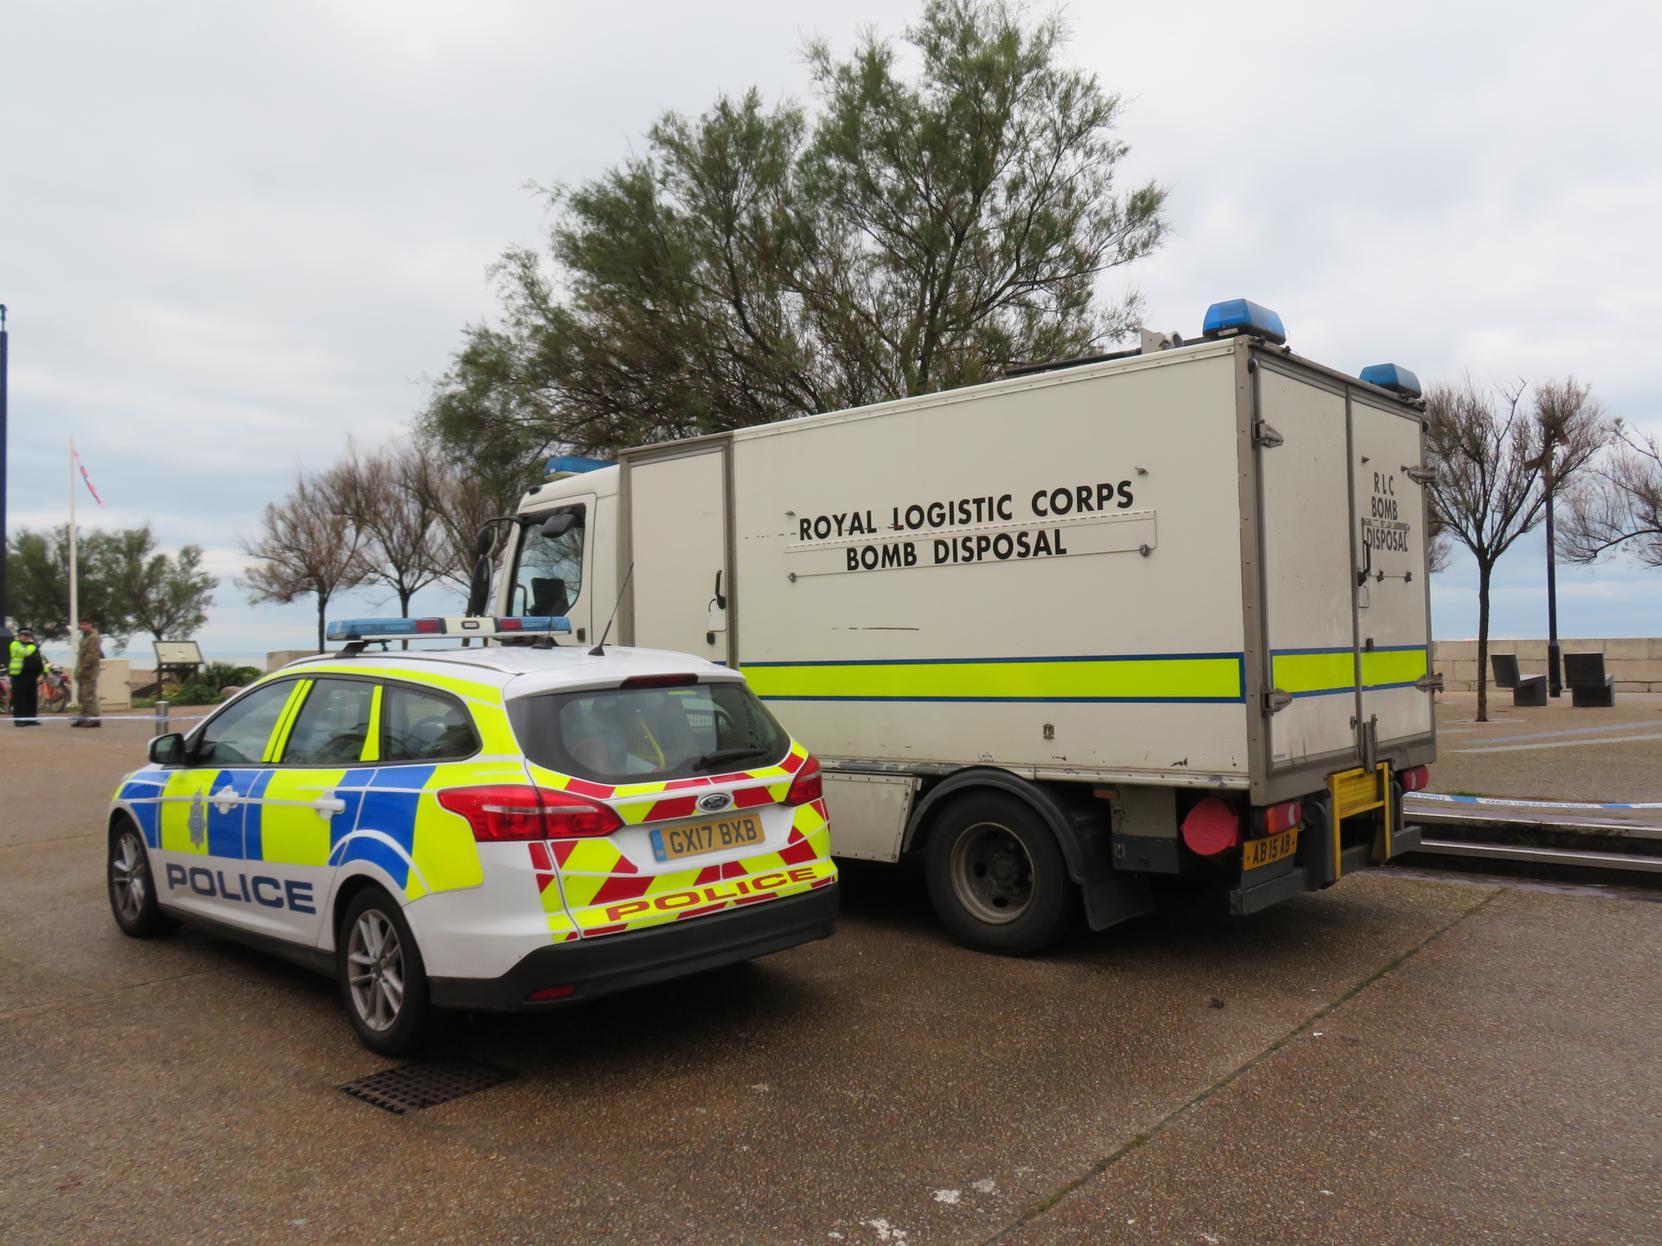 Explosives Ordnance Disposal (EOD) and police vehicles pictured by Worthing resident Nikki Sheeran